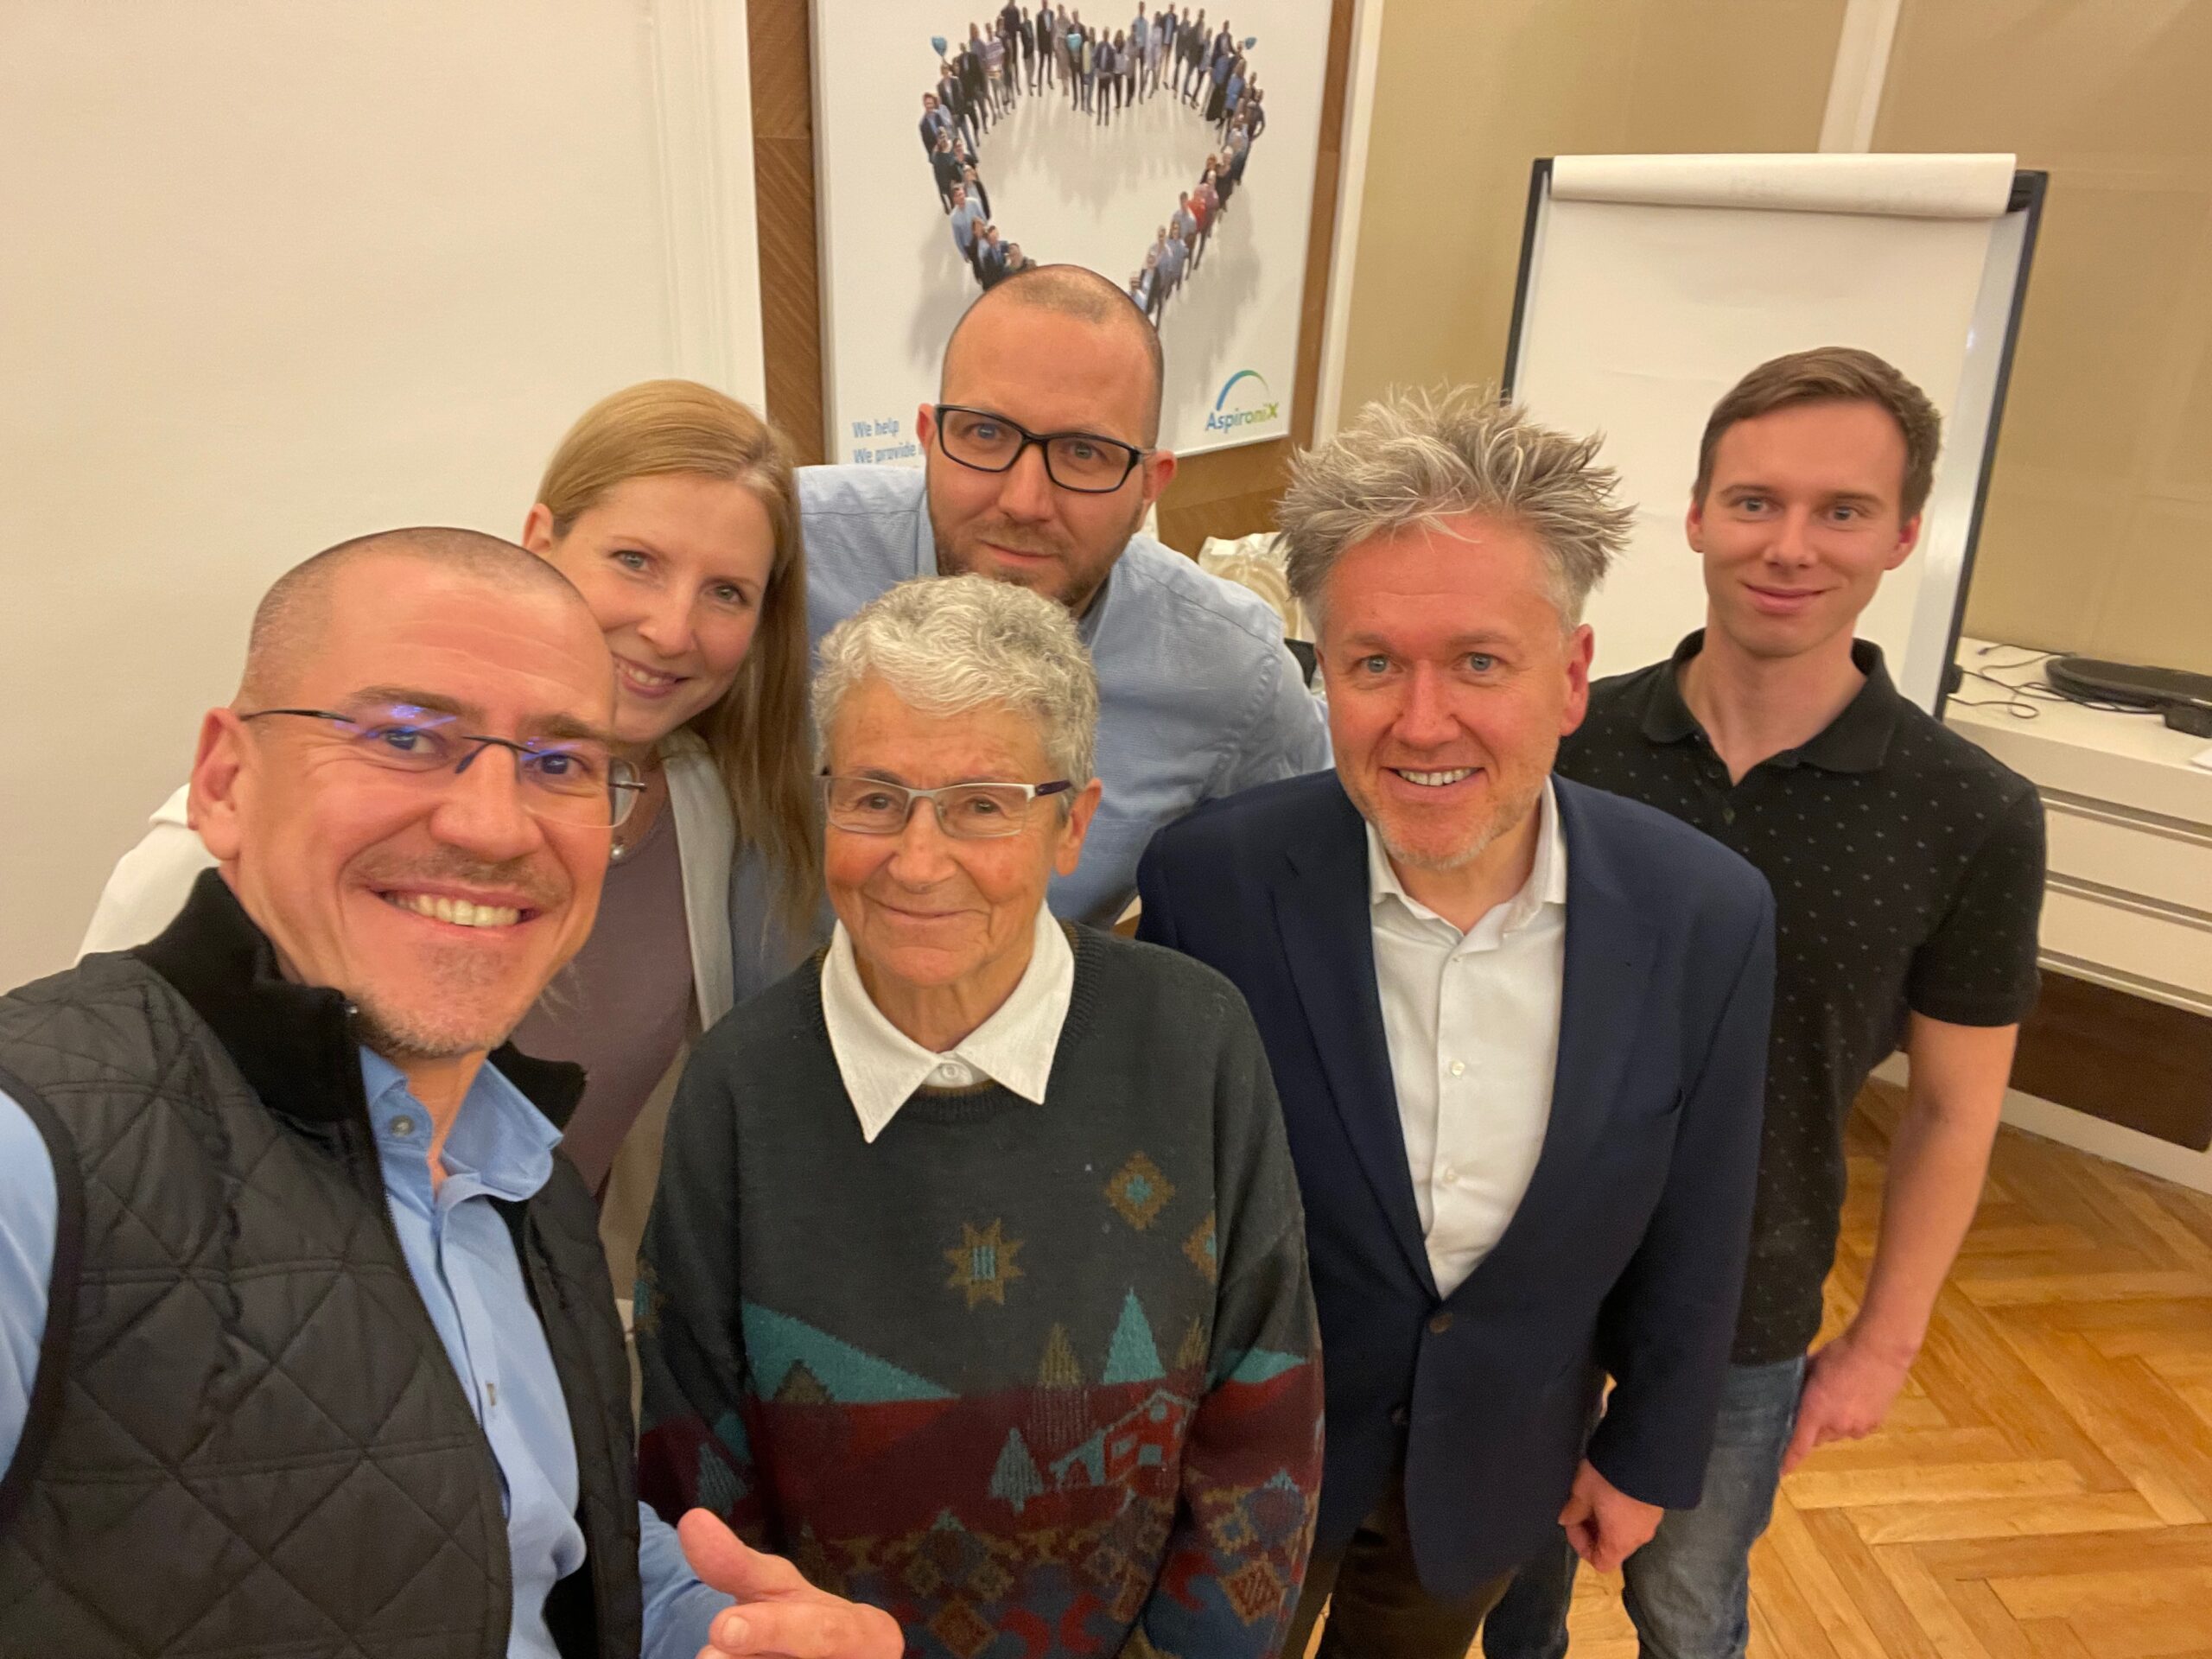 WE PARTICIPATED IN A SEMINAR WITH THE FOUNDER OF WORLD CHRONOBIOLOGY, PROFESSOR HELENA ILLNEROVÁ